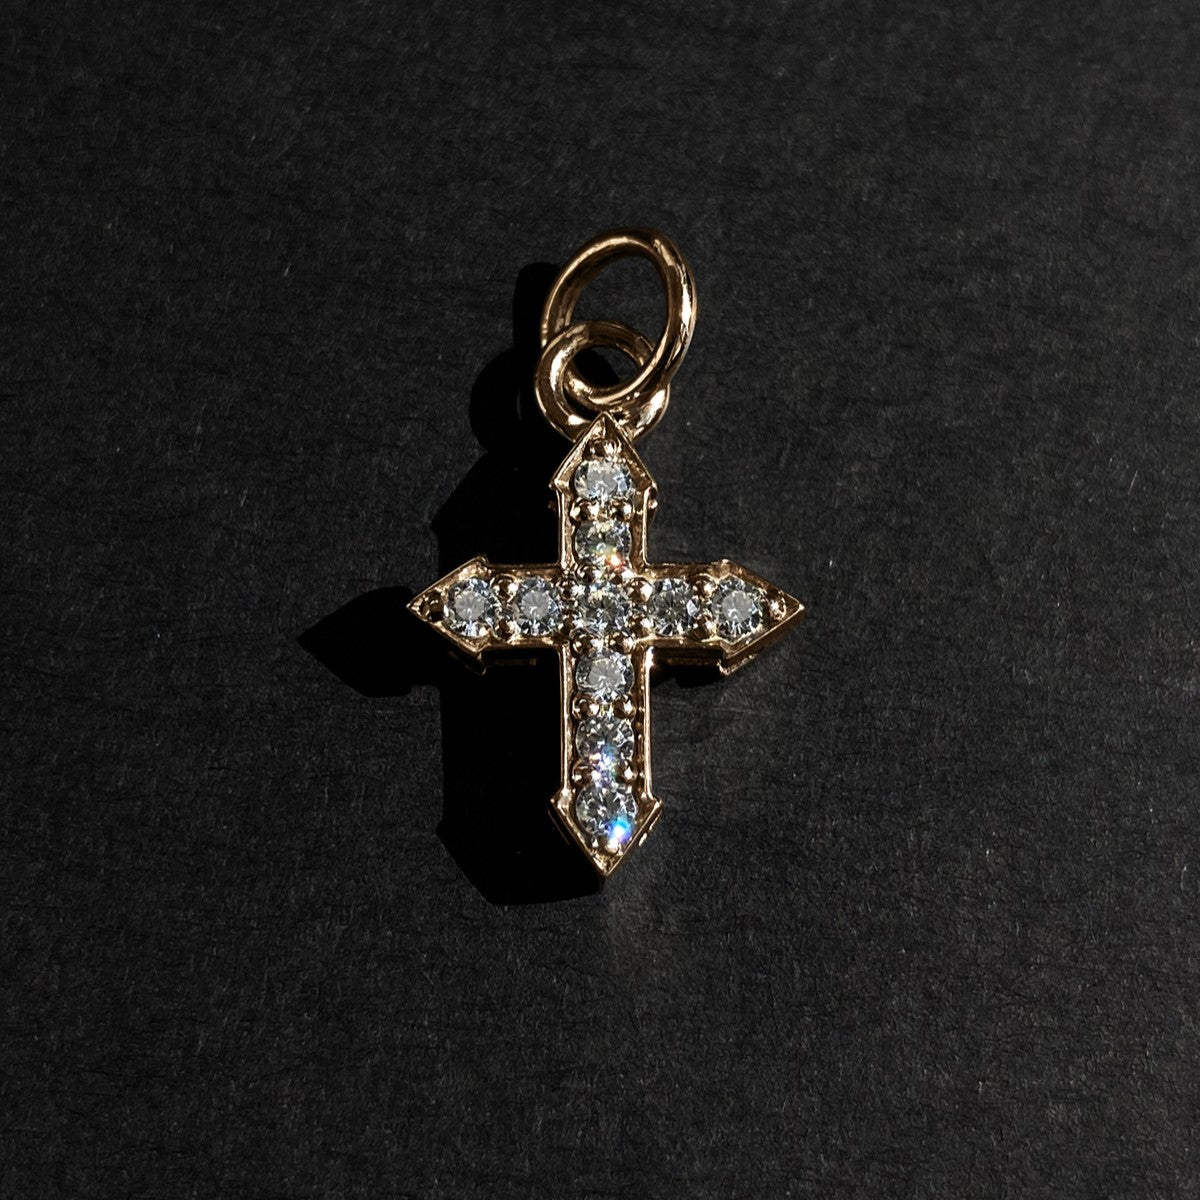 PENDANT CROSS "GLOW" WITH WHITE DIAMONDS / SOLID GOLD